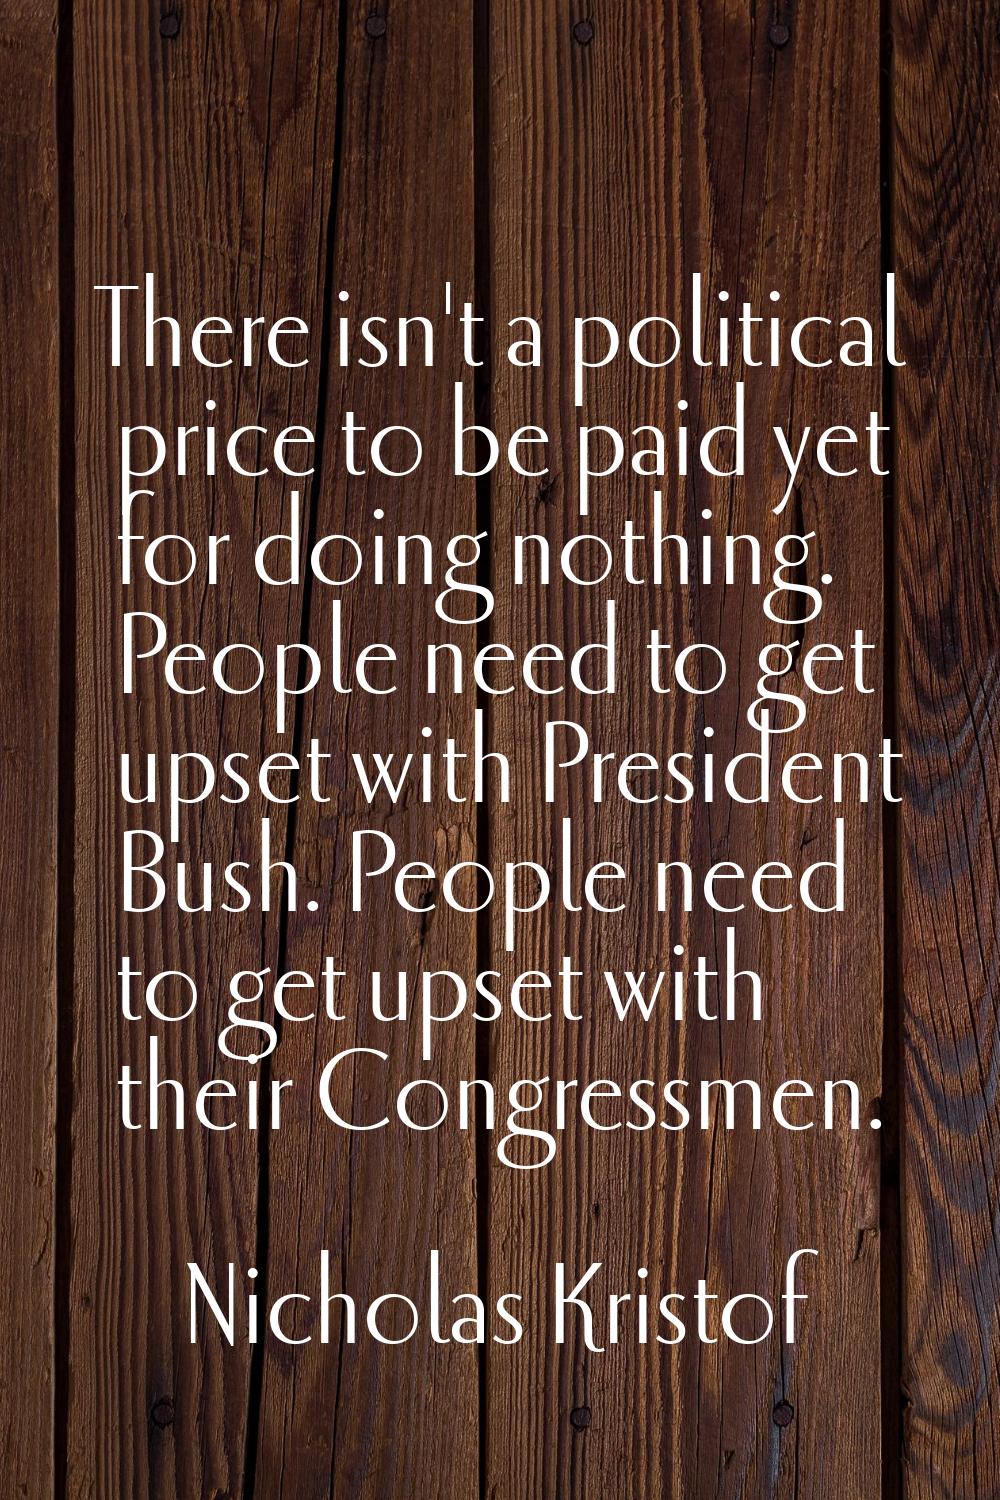 There isn't a political price to be paid yet for doing nothing. People need to get upset with Presi